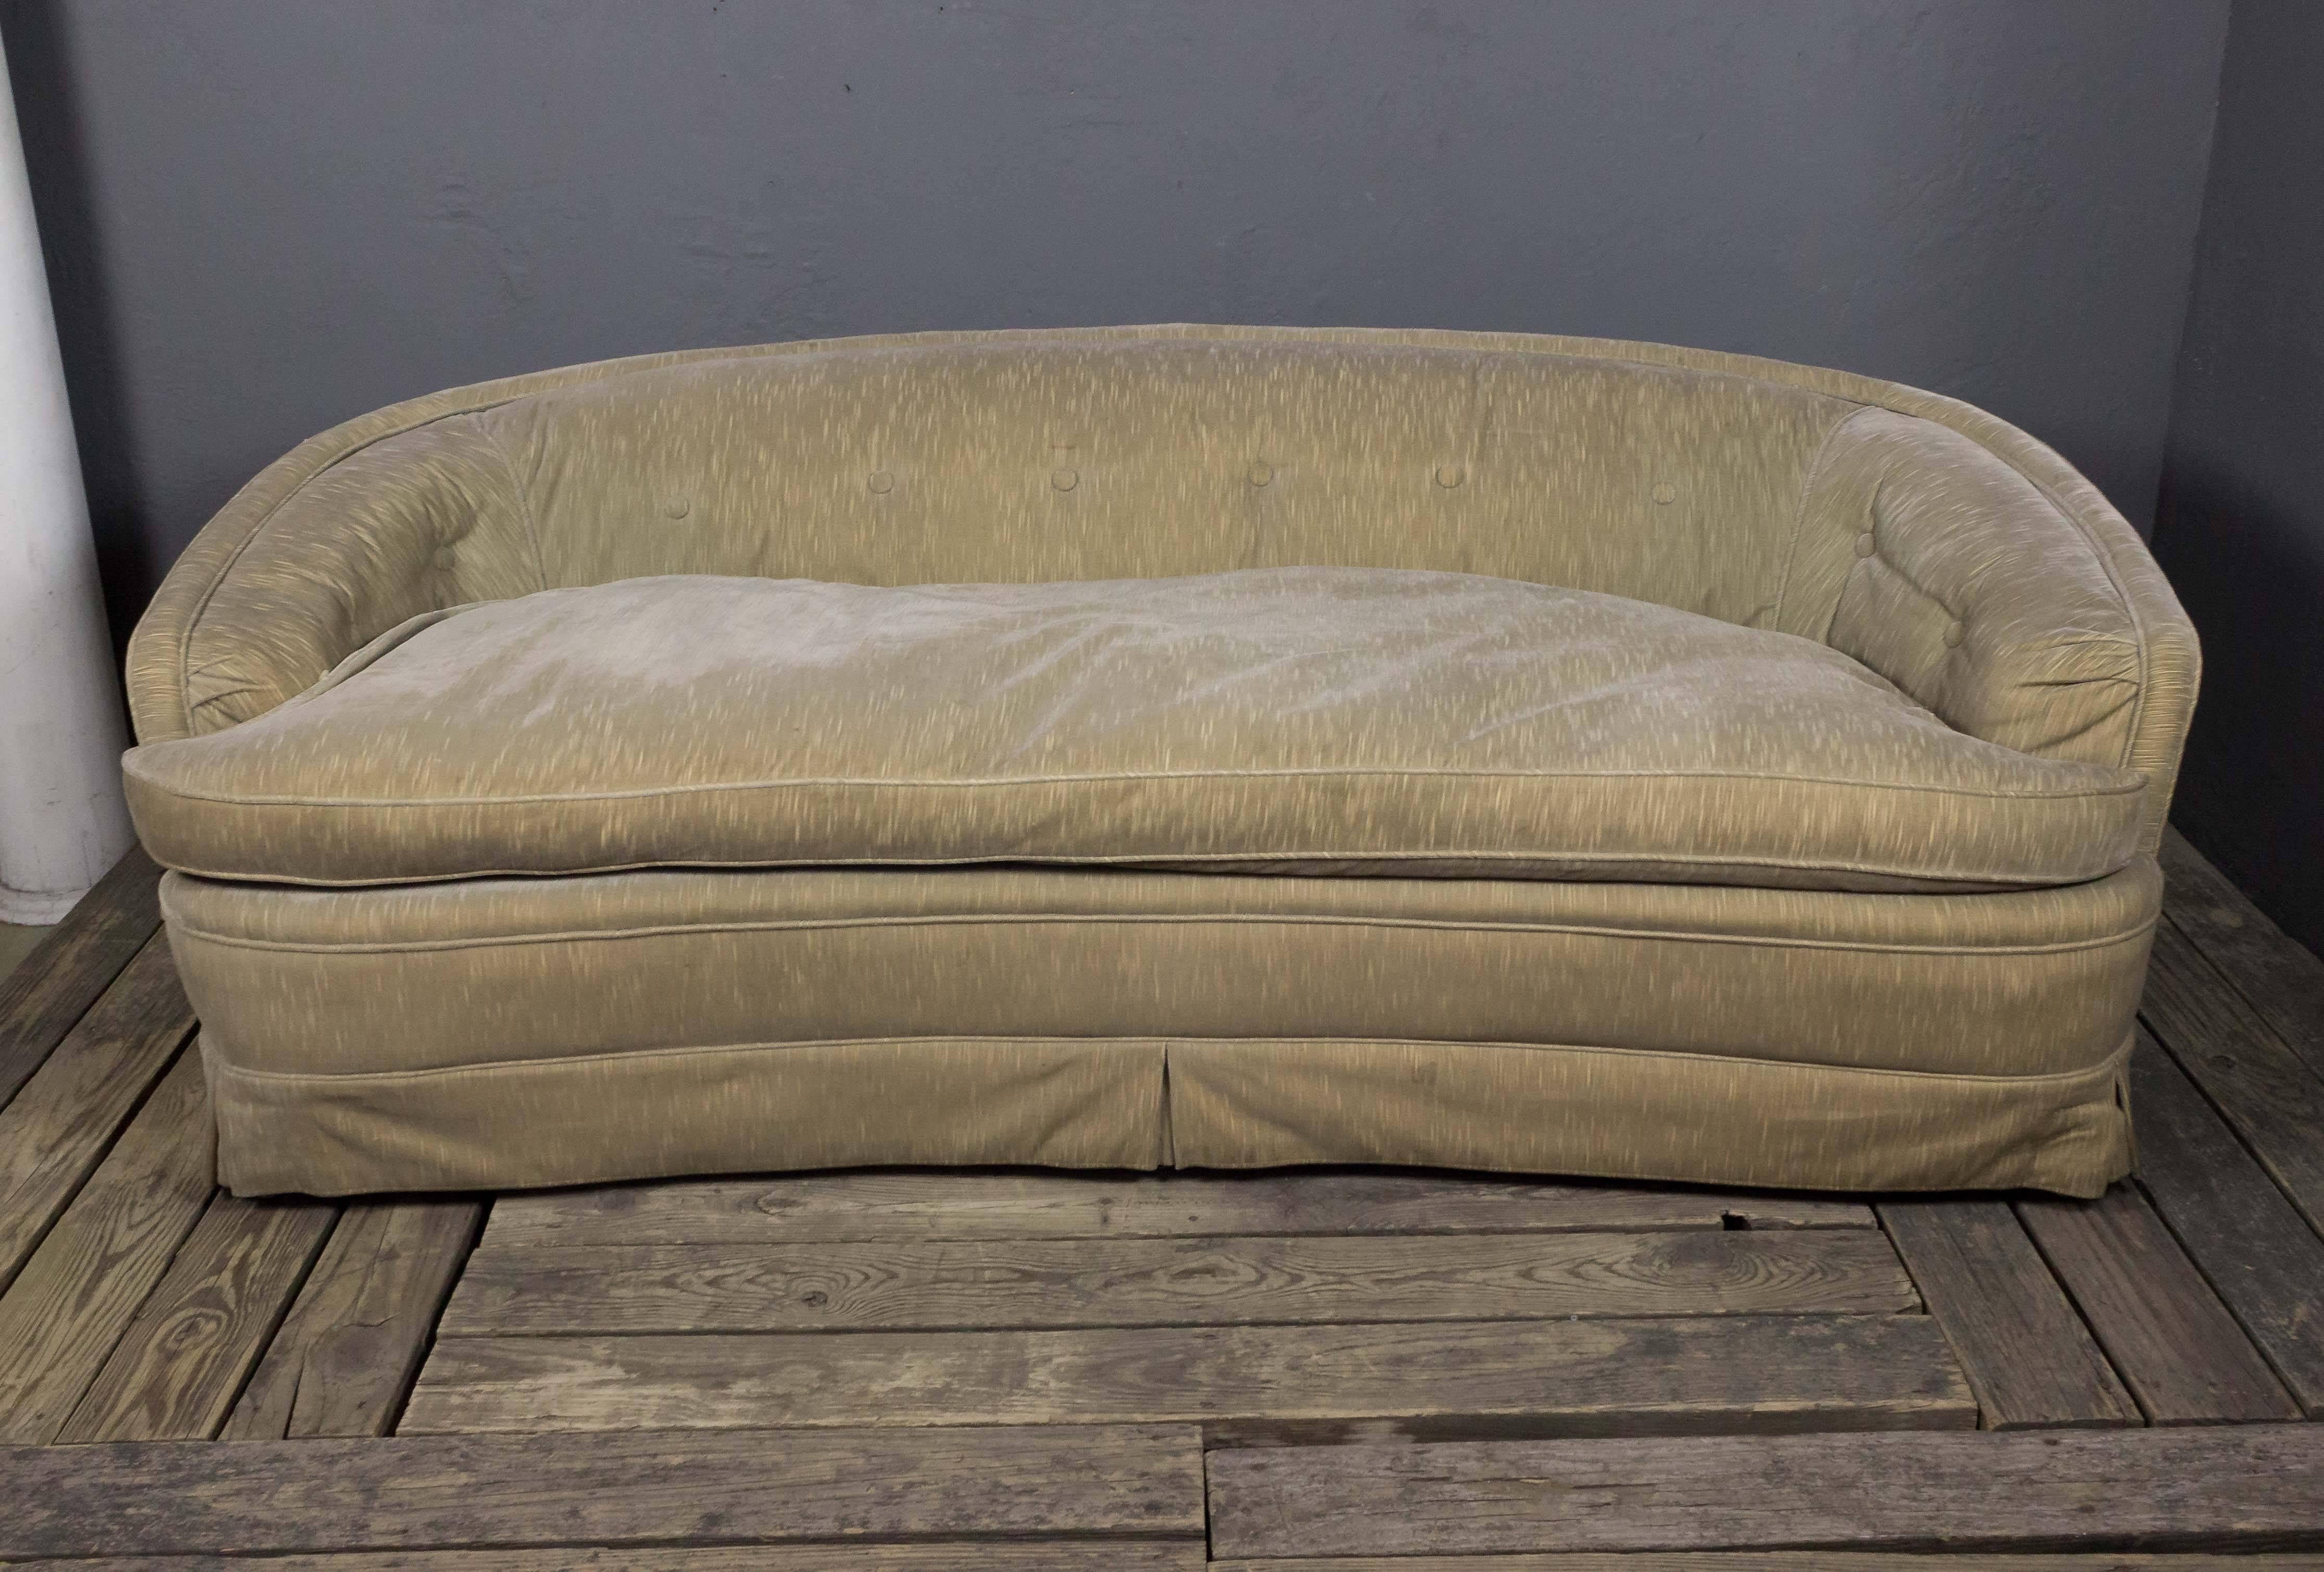 An American mid century sofa with curved back and arms. Make a bold statement in your home with this Mid-Century Modern sofa. Featuring a curved back and arms and upholstered with a skirt and loose seat cushion, this sofa is ready for use - though